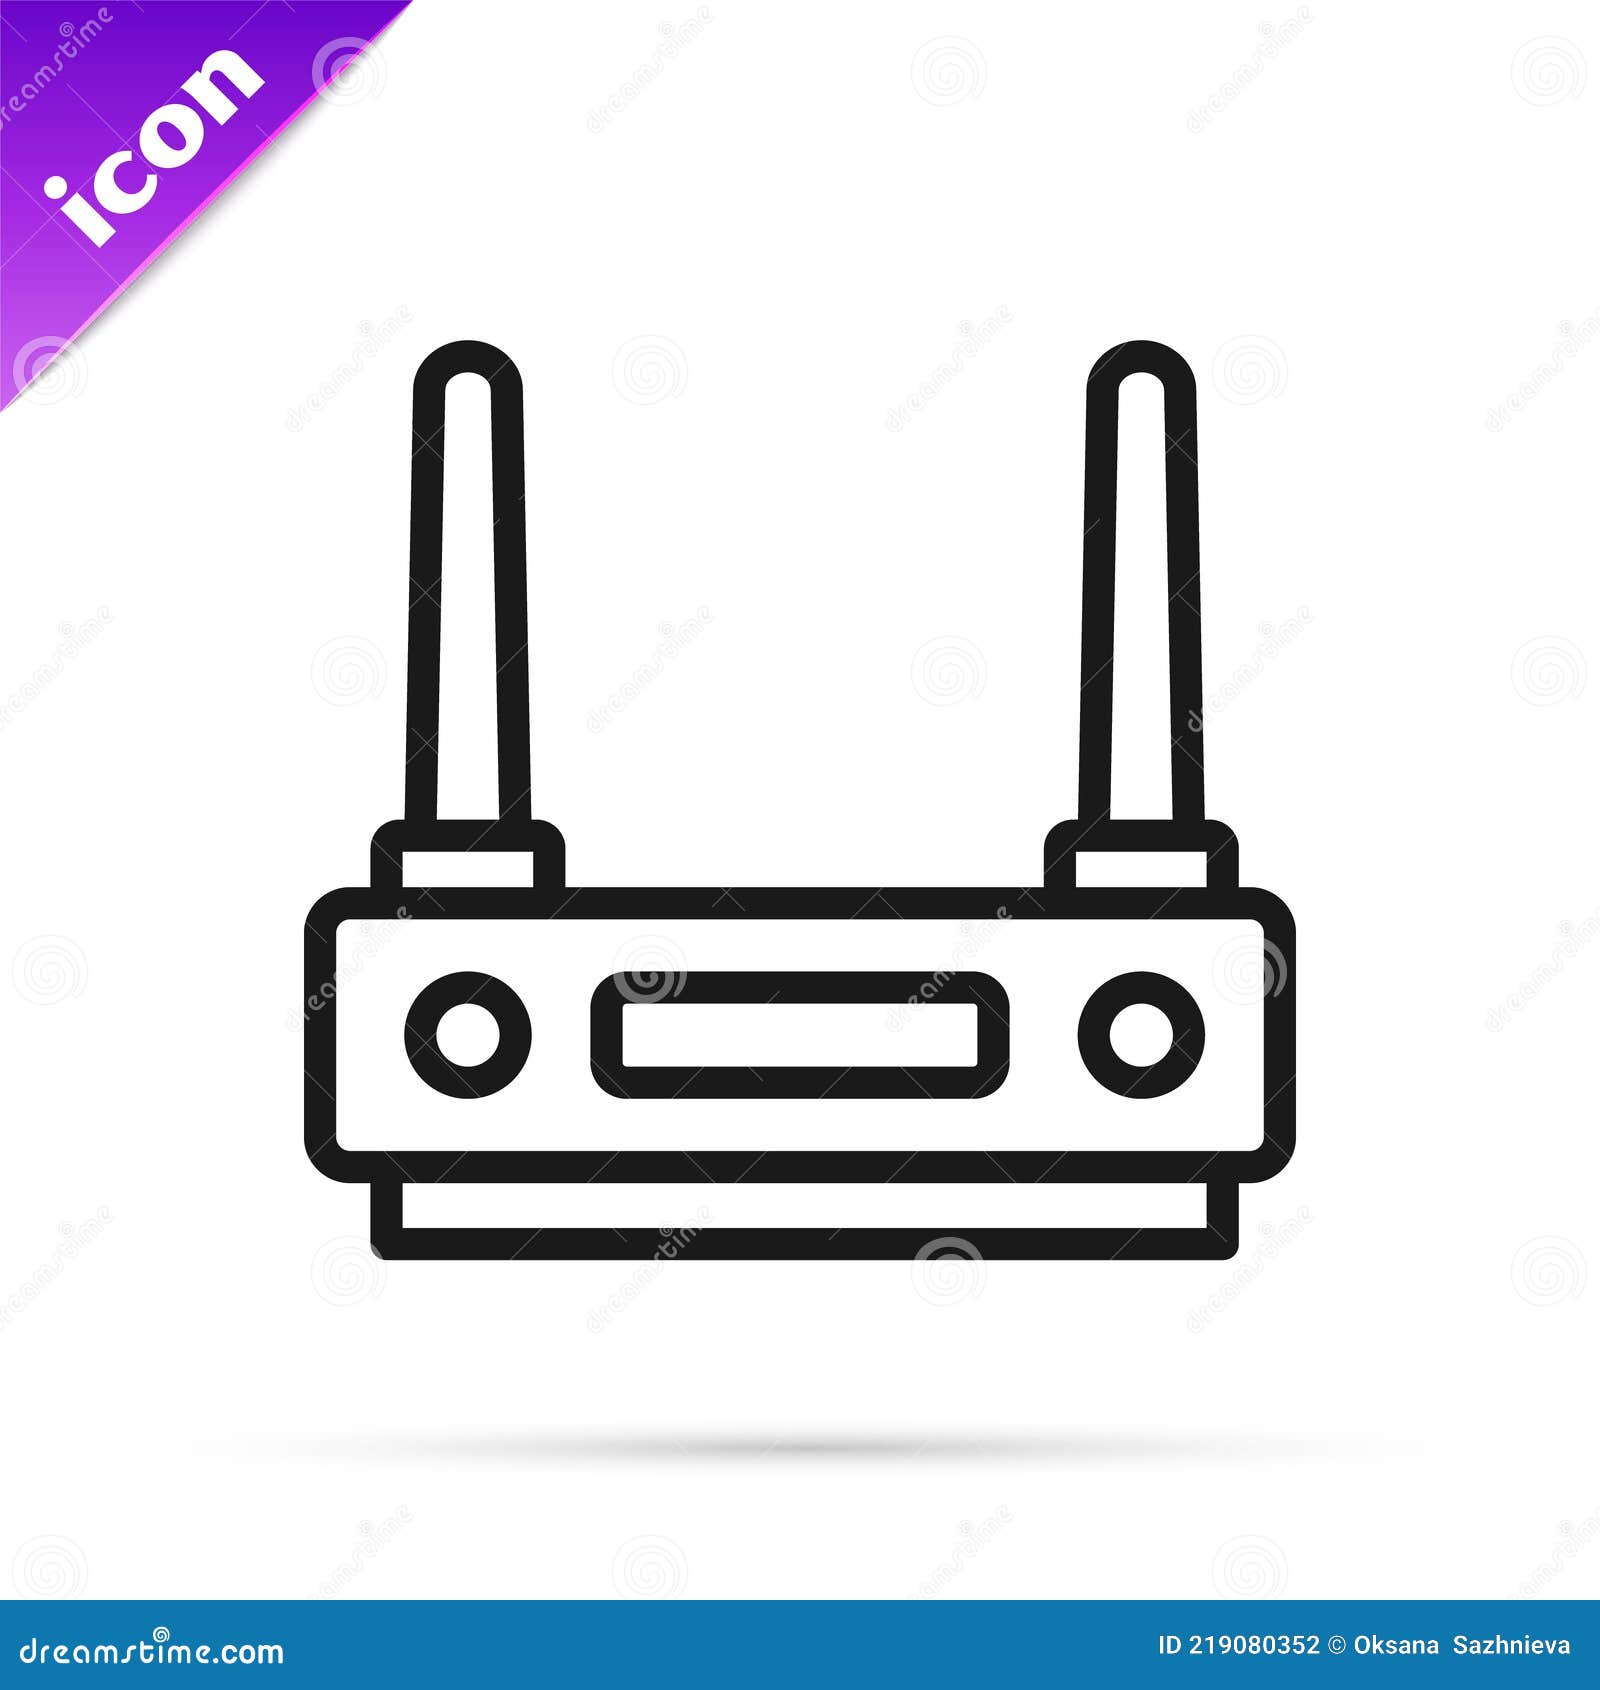 Black Line Router and Wi-fi Signal Icon Isolated on White Background. Wireless Ethernet Modem Router Stock Vector - Illustration of router: